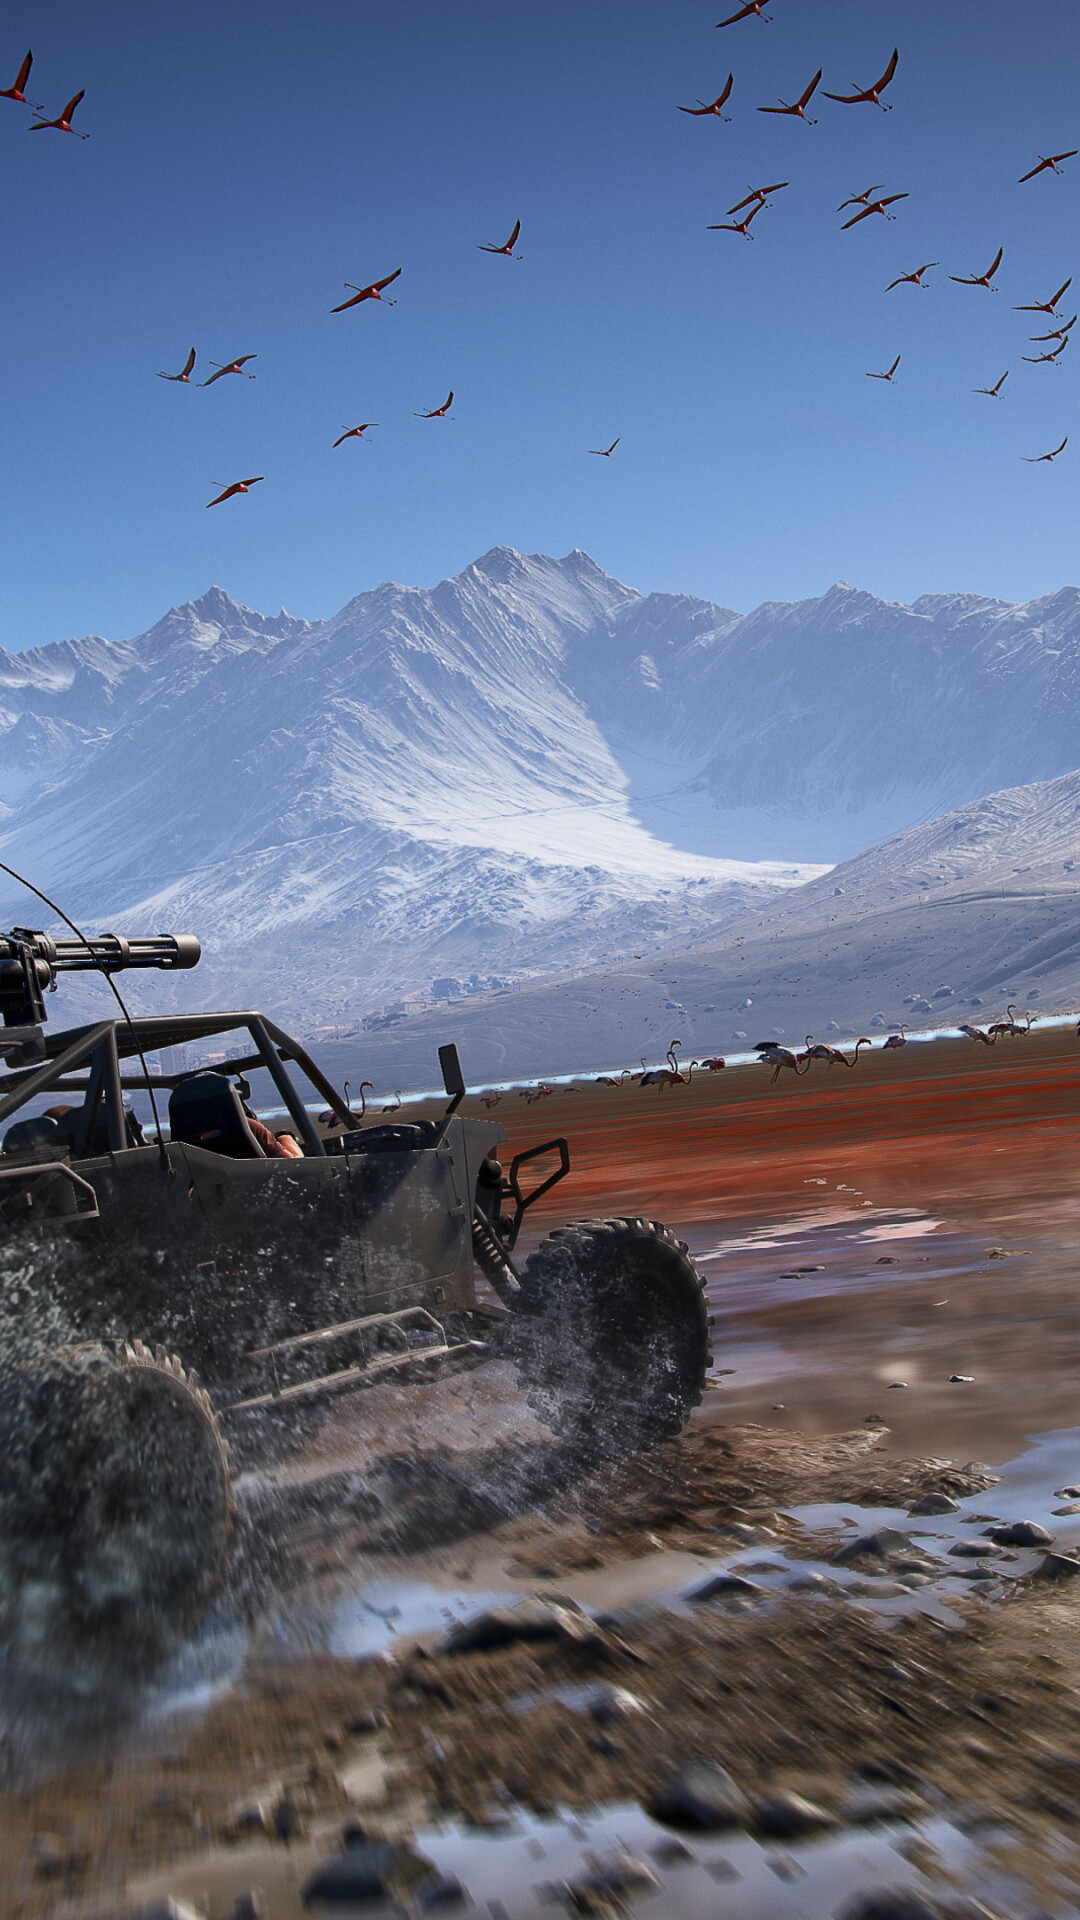 Ghost Recon: Wildlands: One of the largest open-world settings in Ubisoft video games, Tom Clancy, SpecOps. 1080x1920 Full HD Background.